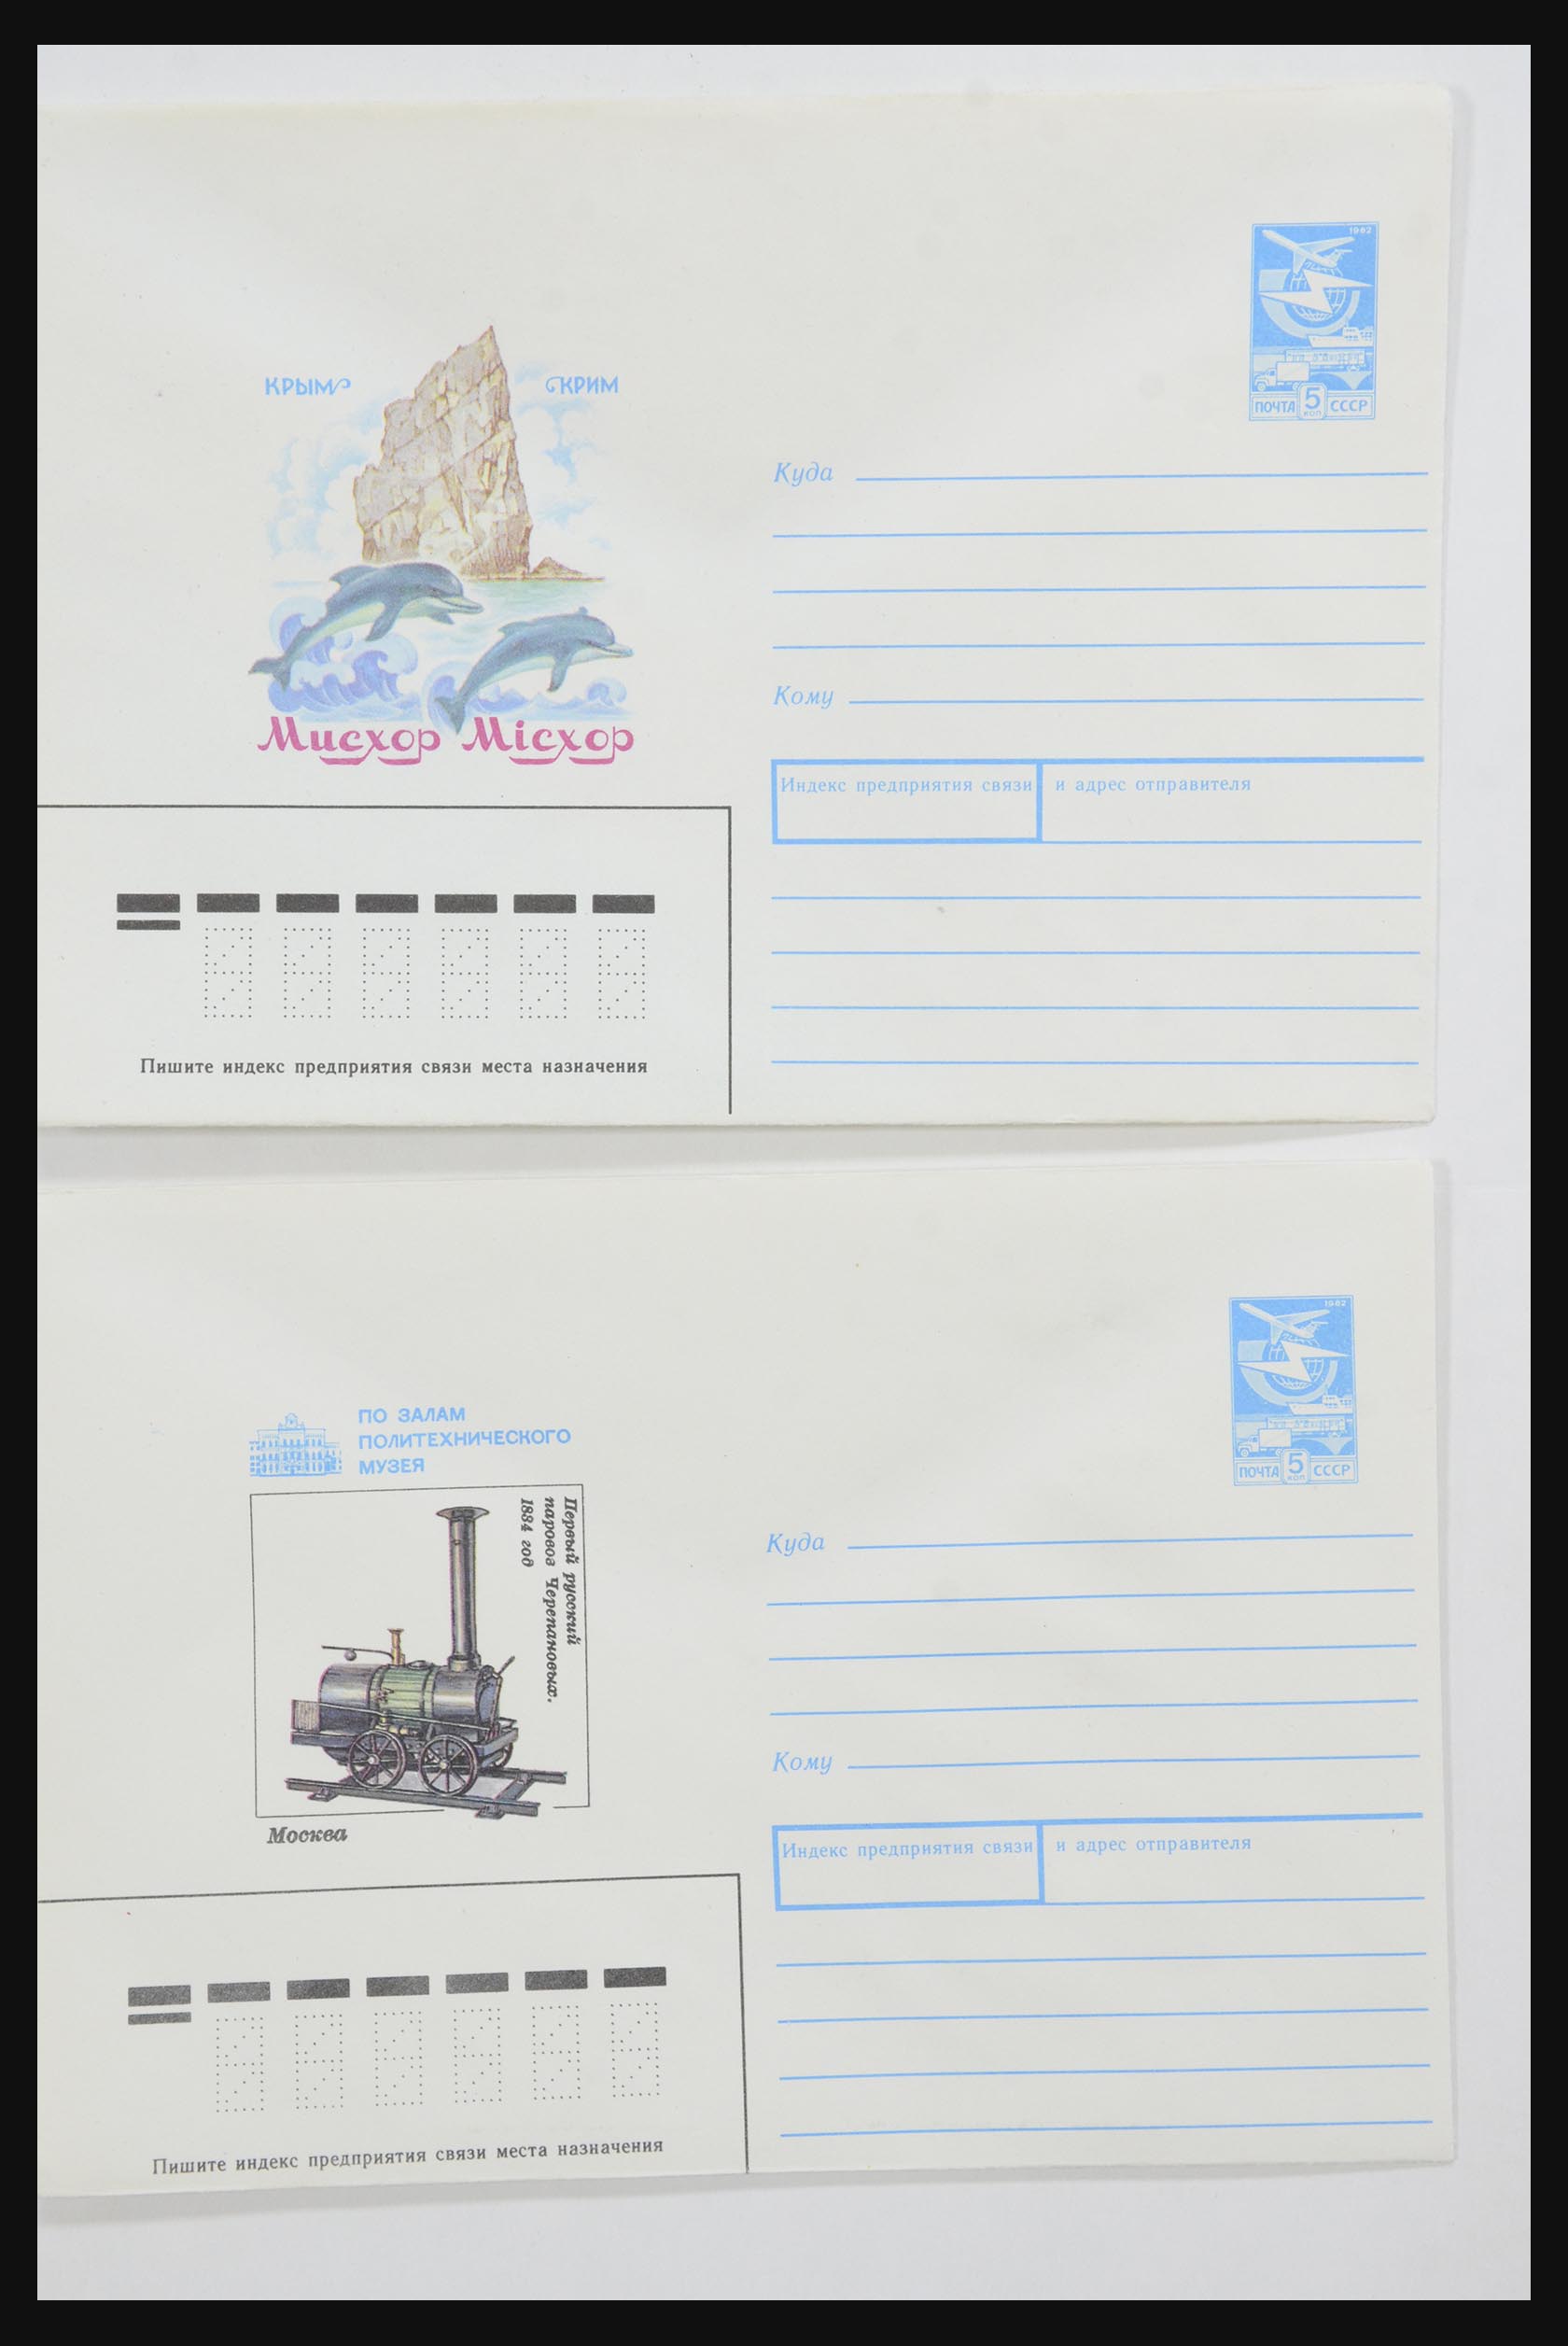 31928 0039 - 31928 Eastern Europe covers 1960's-1990's.